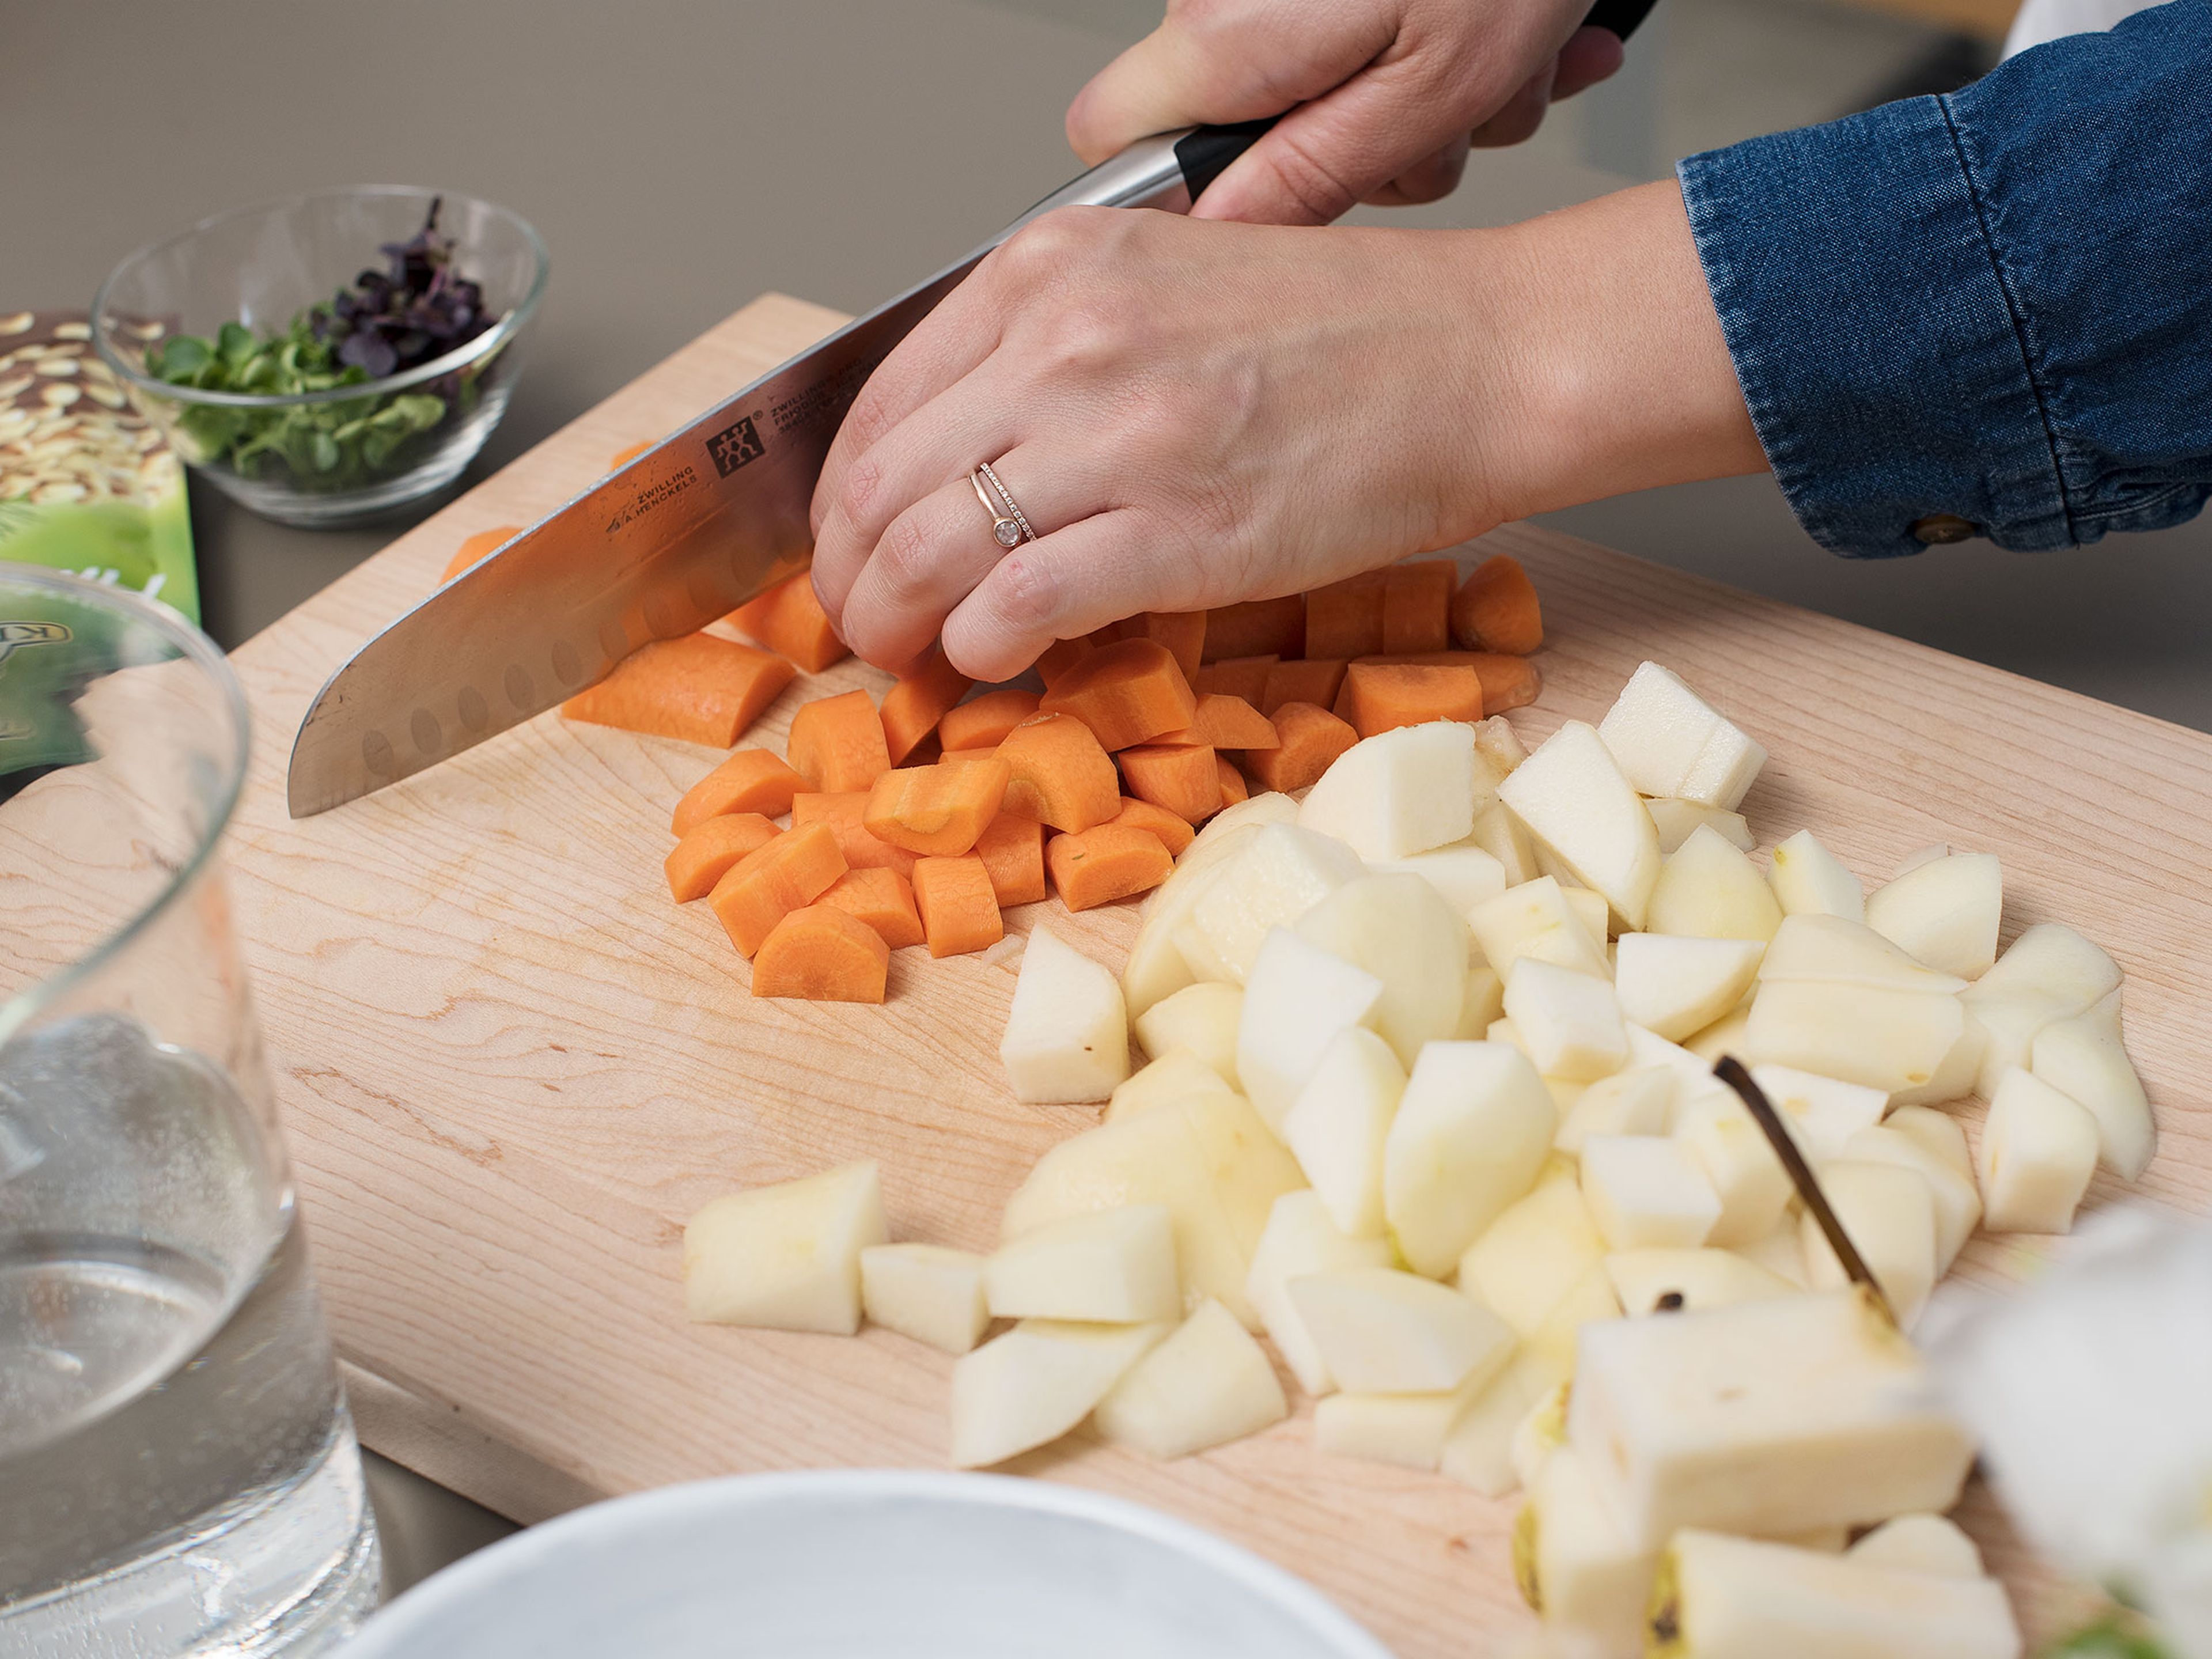 Peel, core, and cut pears into small chunks. Peel and cut carrots into bite-sized pieces.